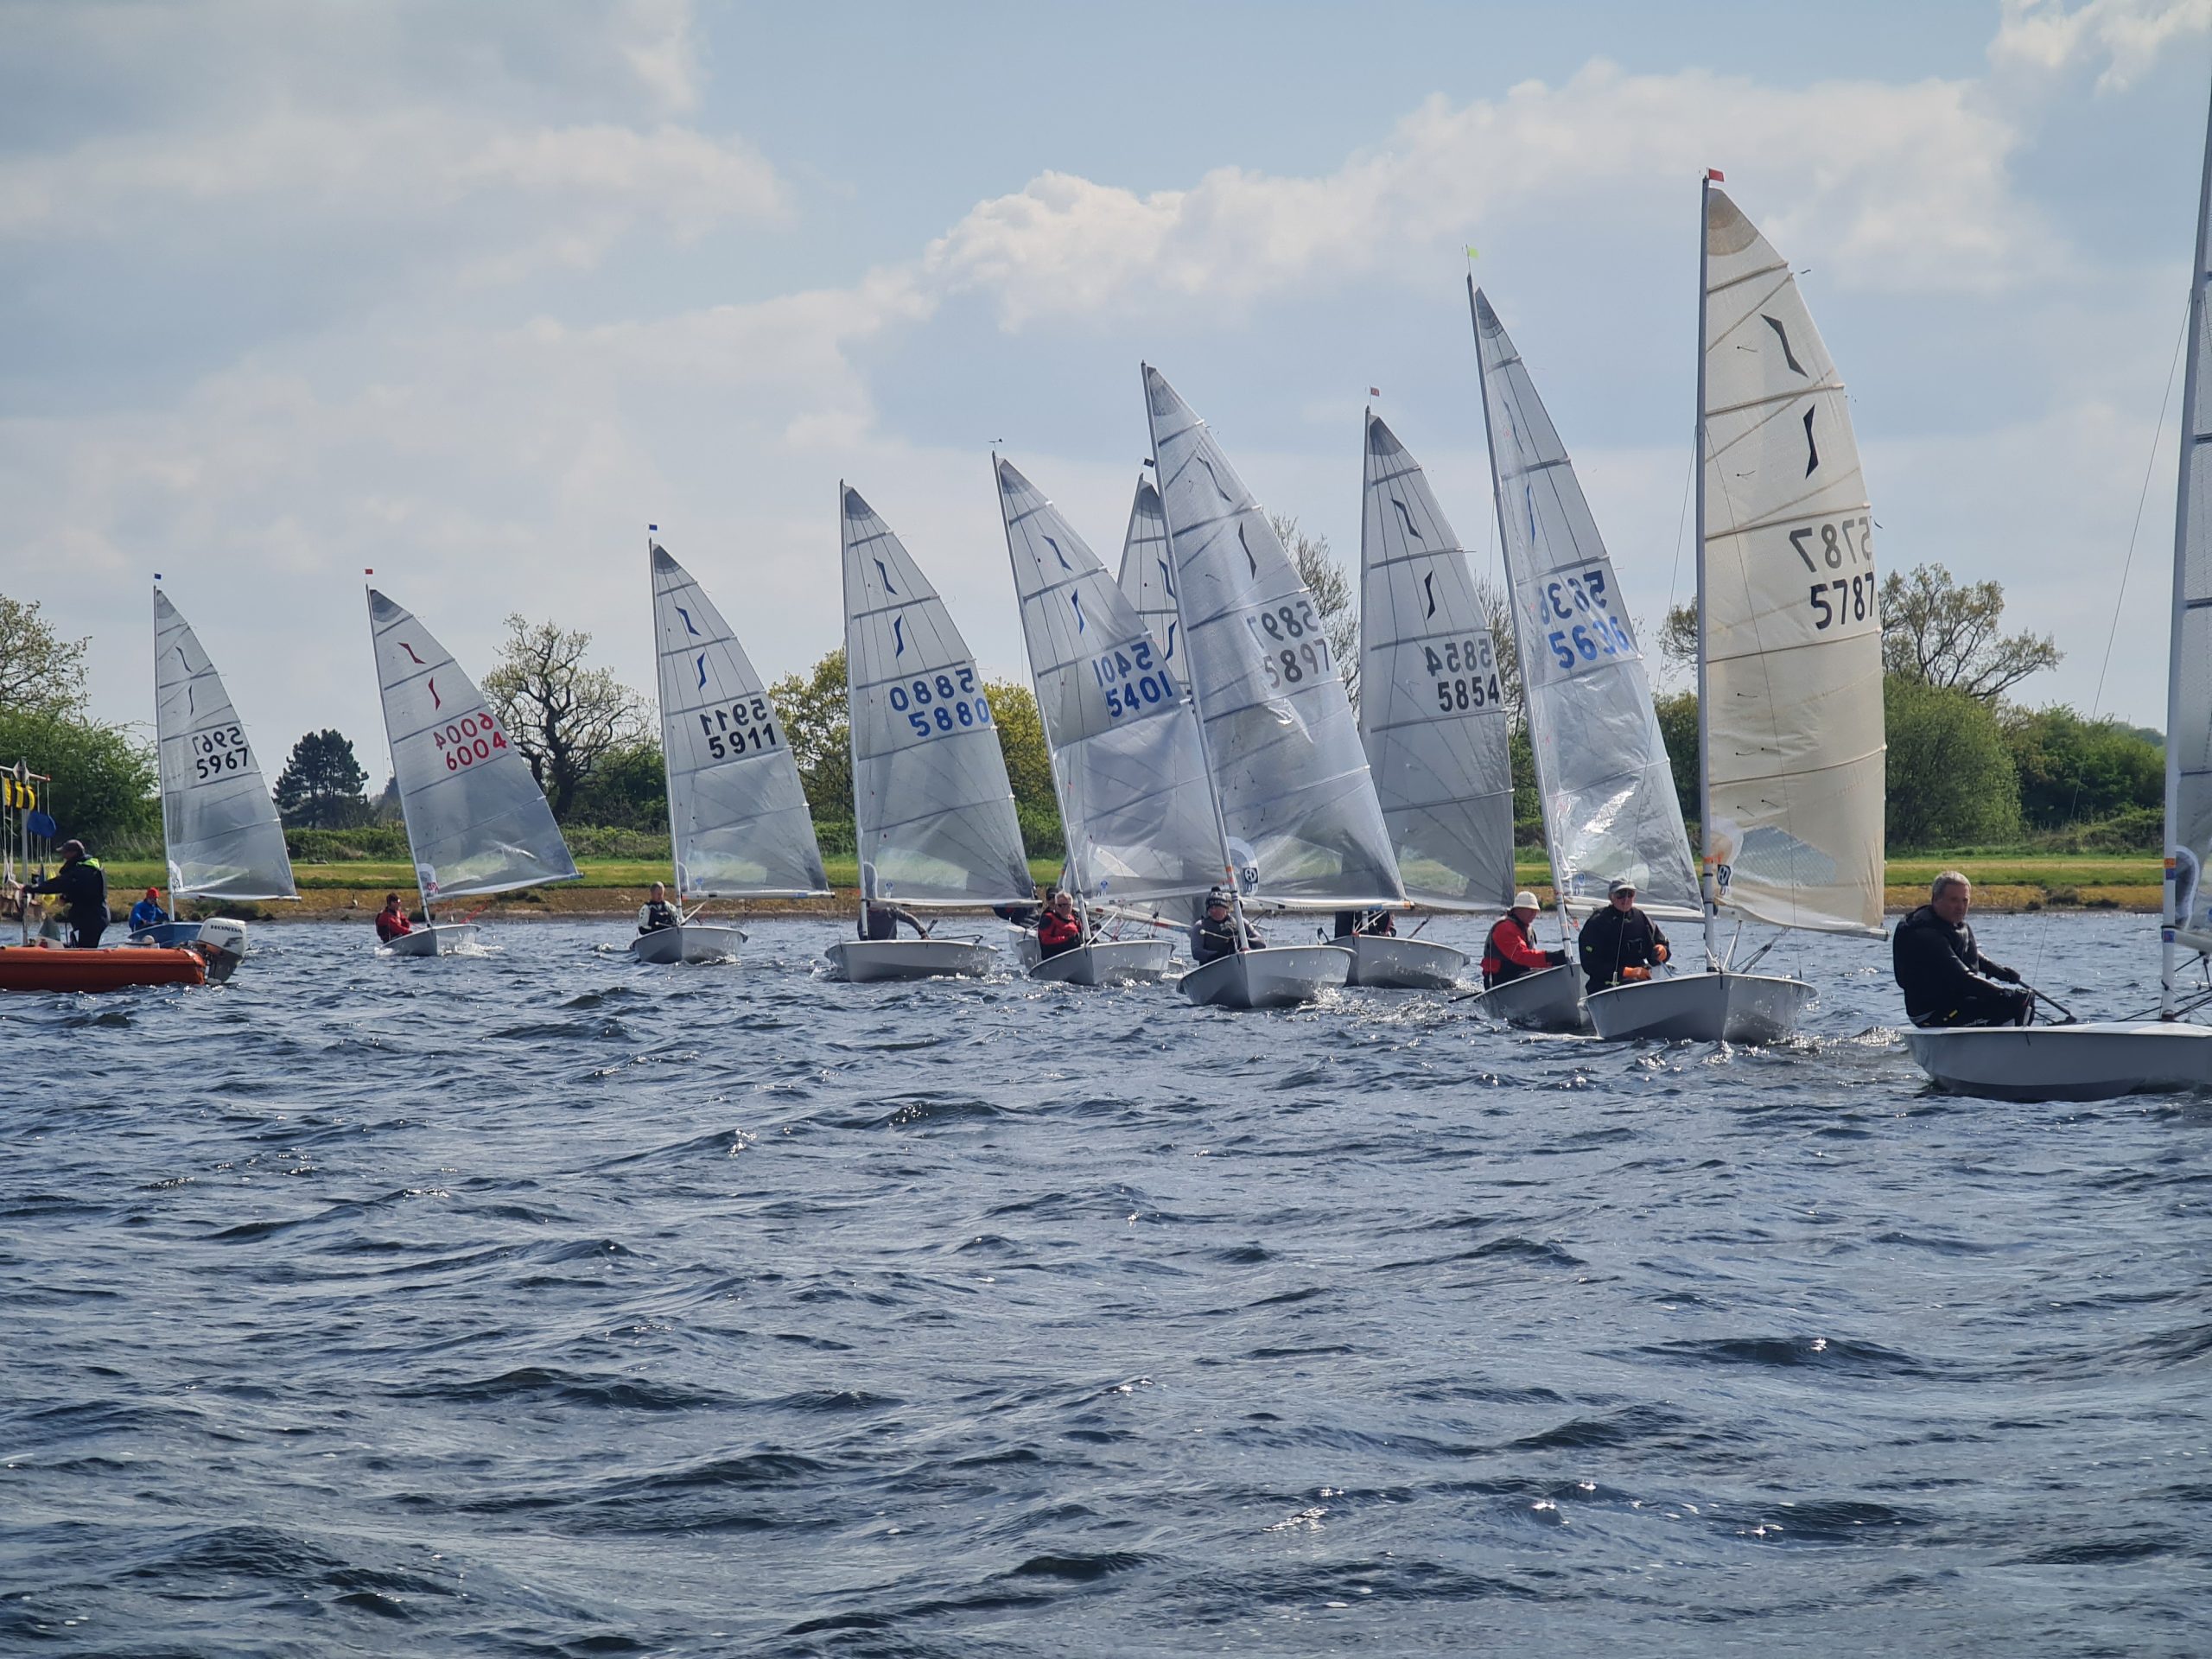 solo dinghy's on a start line